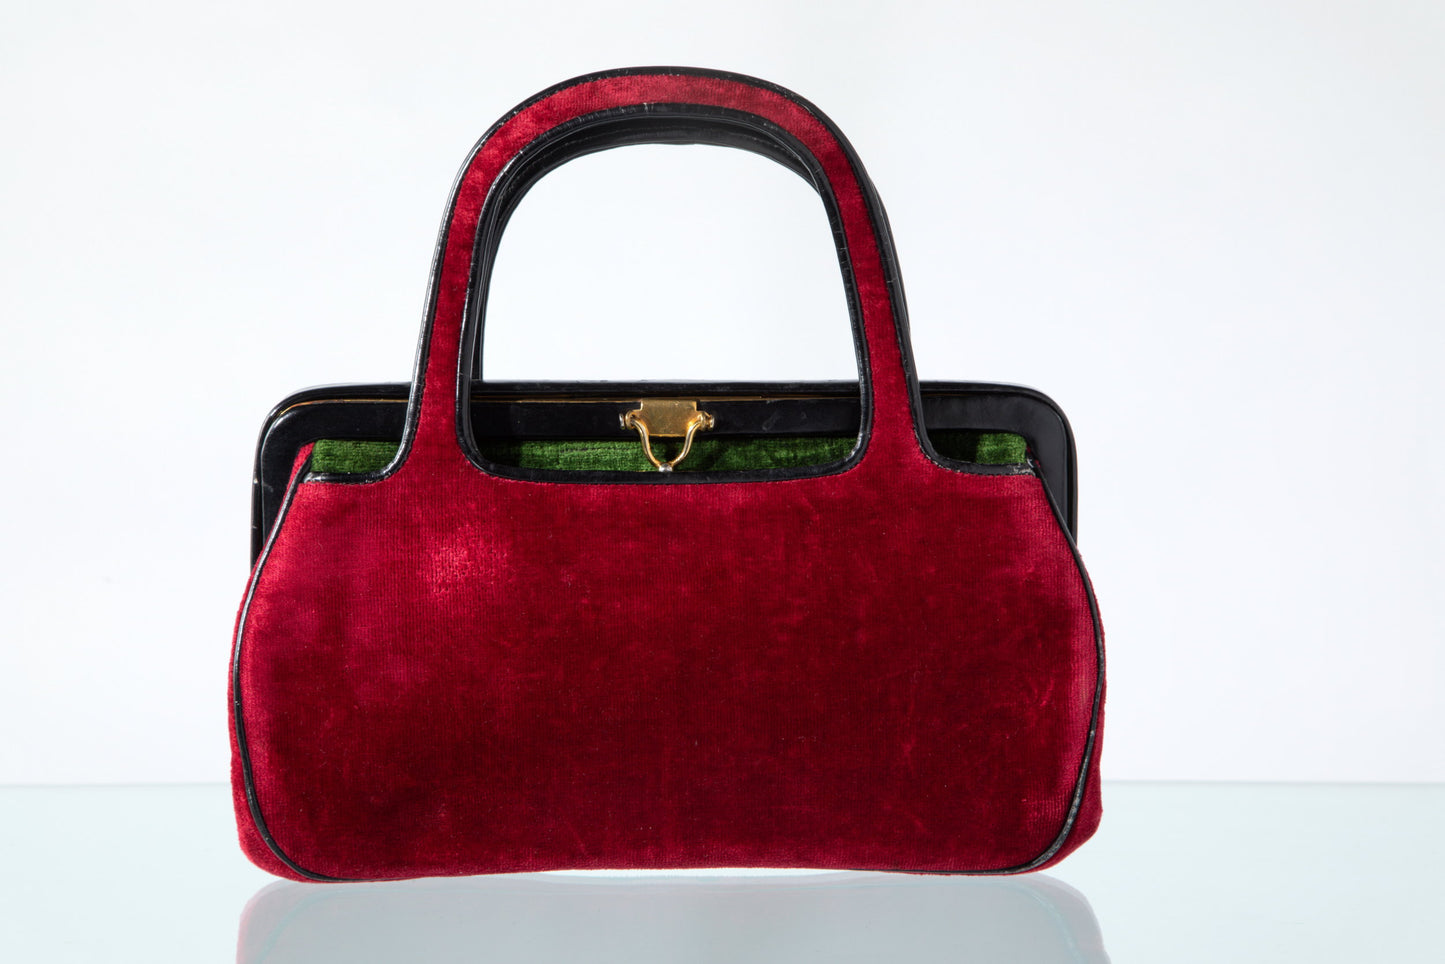 Roberta Di Camerino bag with shoulder strap and removable brass handle